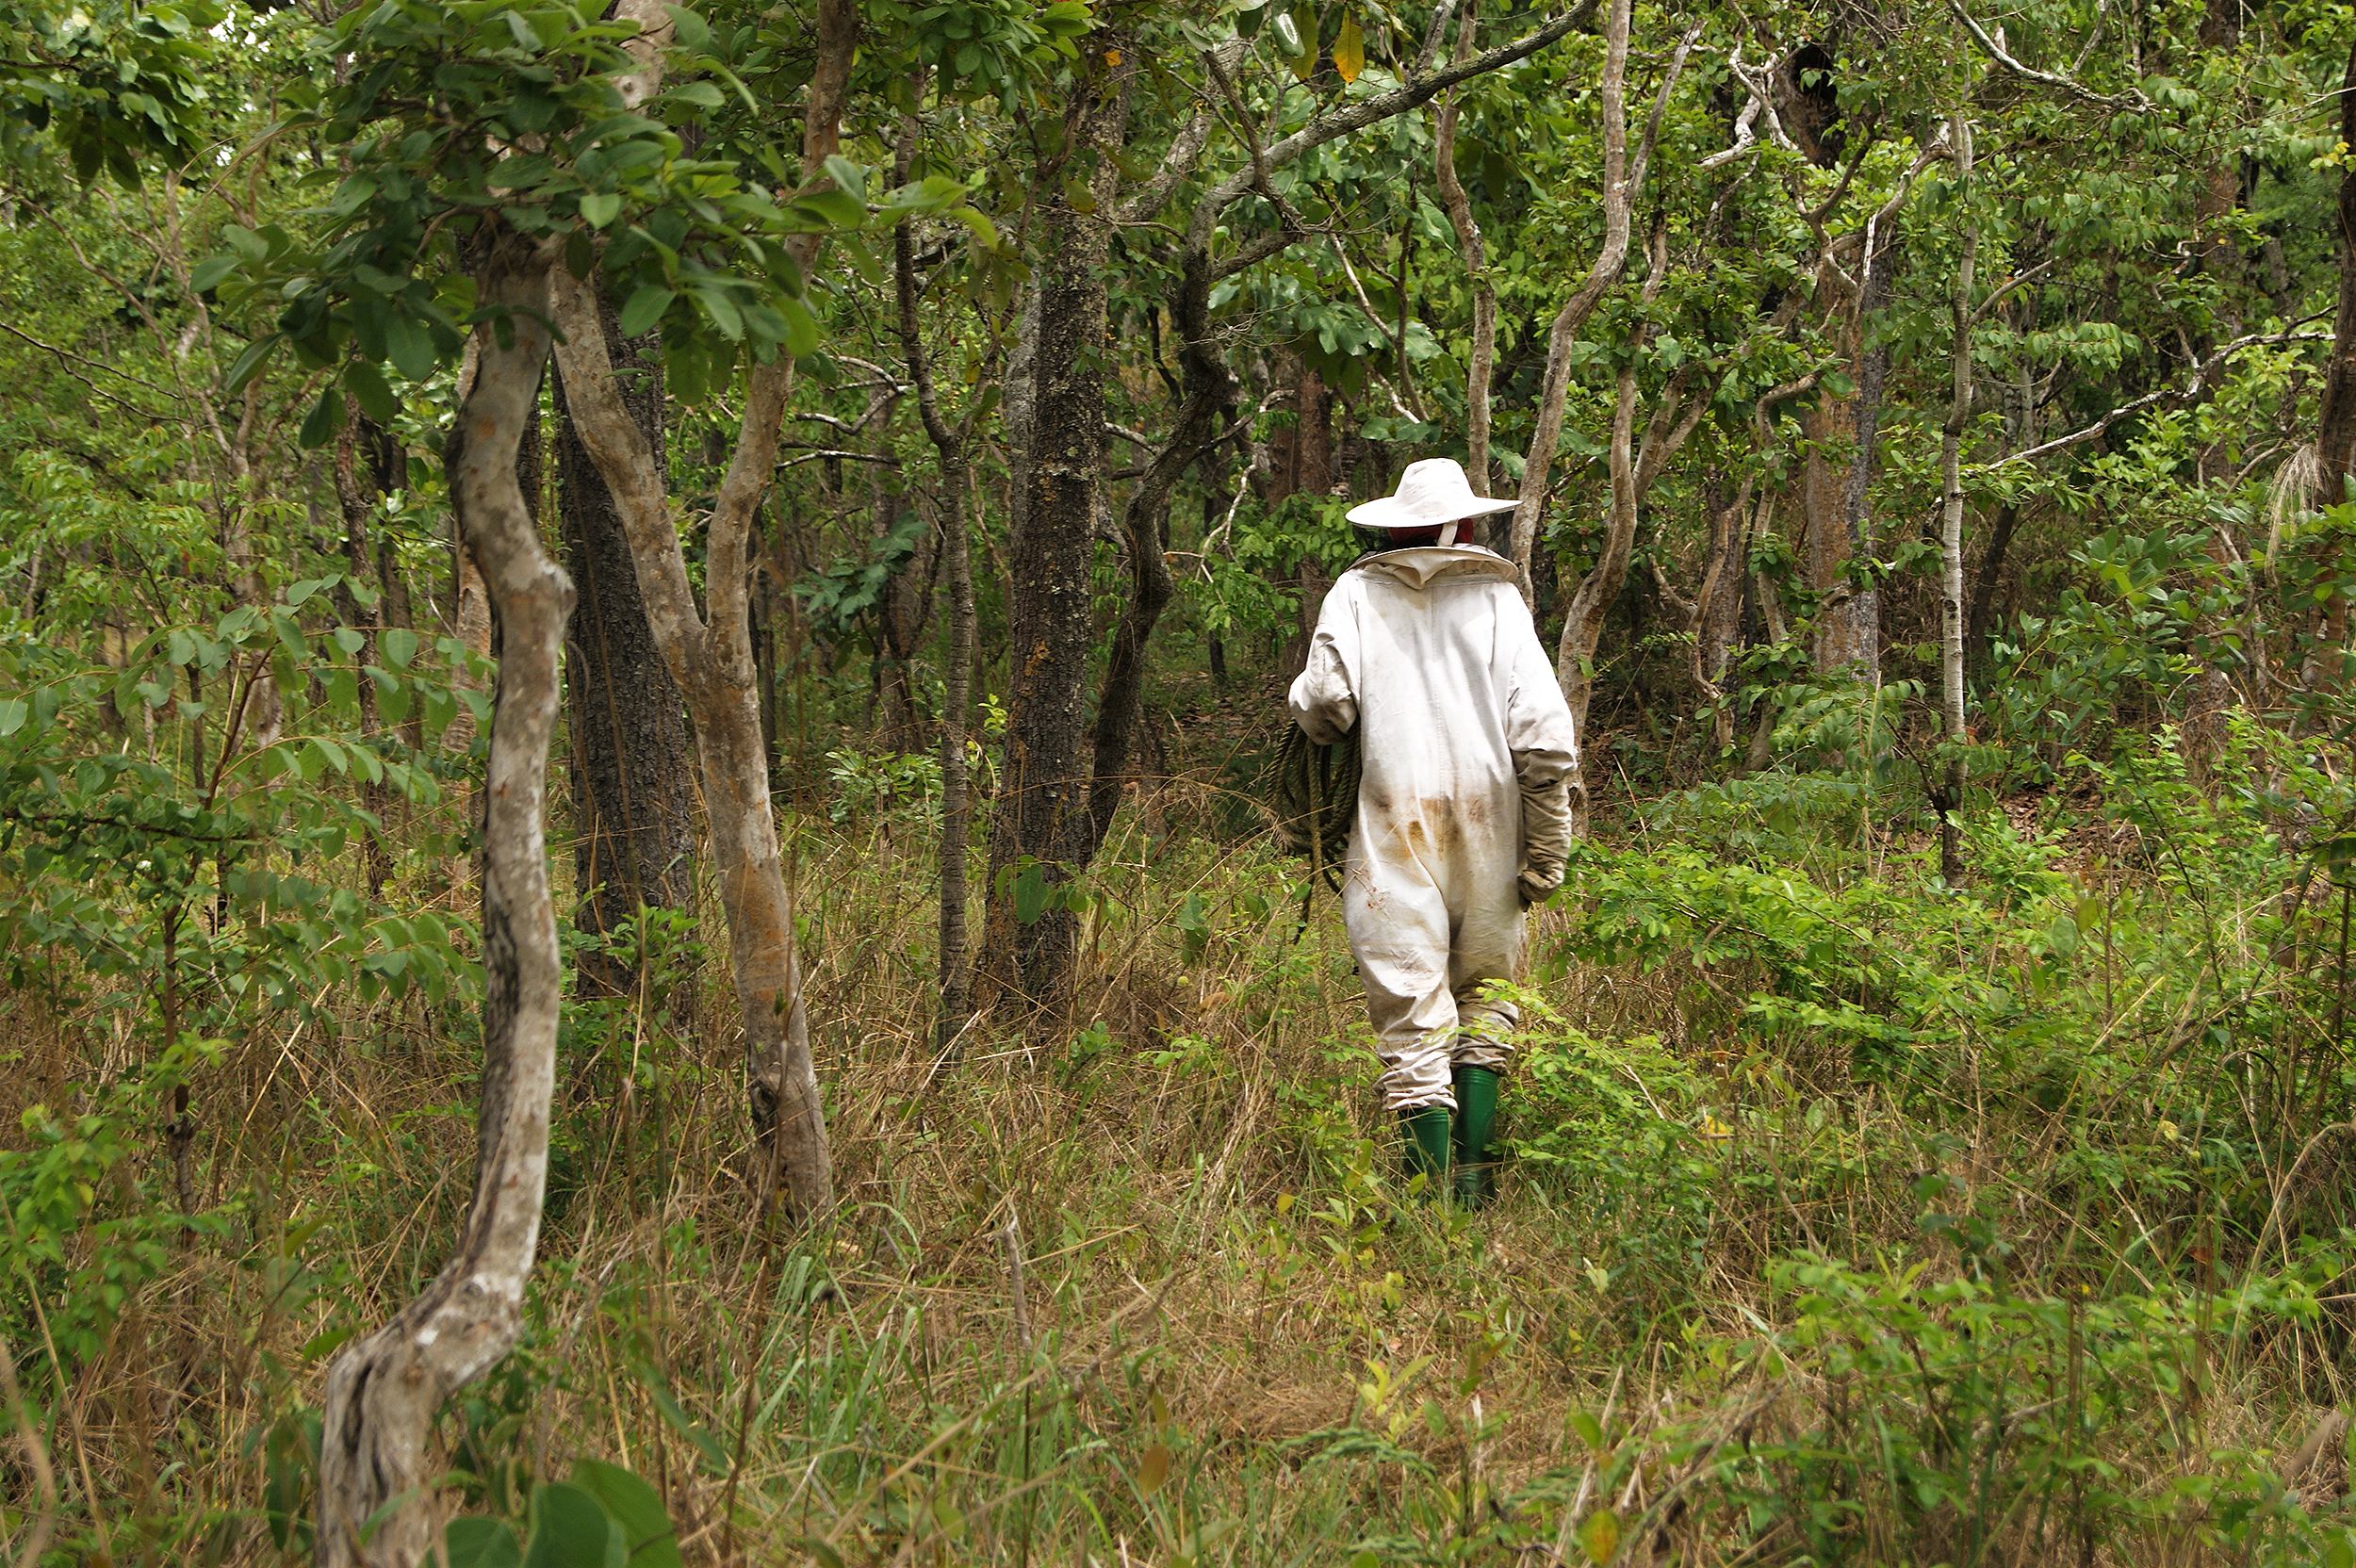 Beekeeper walking into the Miombo forest.png__PID:cf6ffb39-aaf6-4fc5-9a2c-2e4b283c56ad